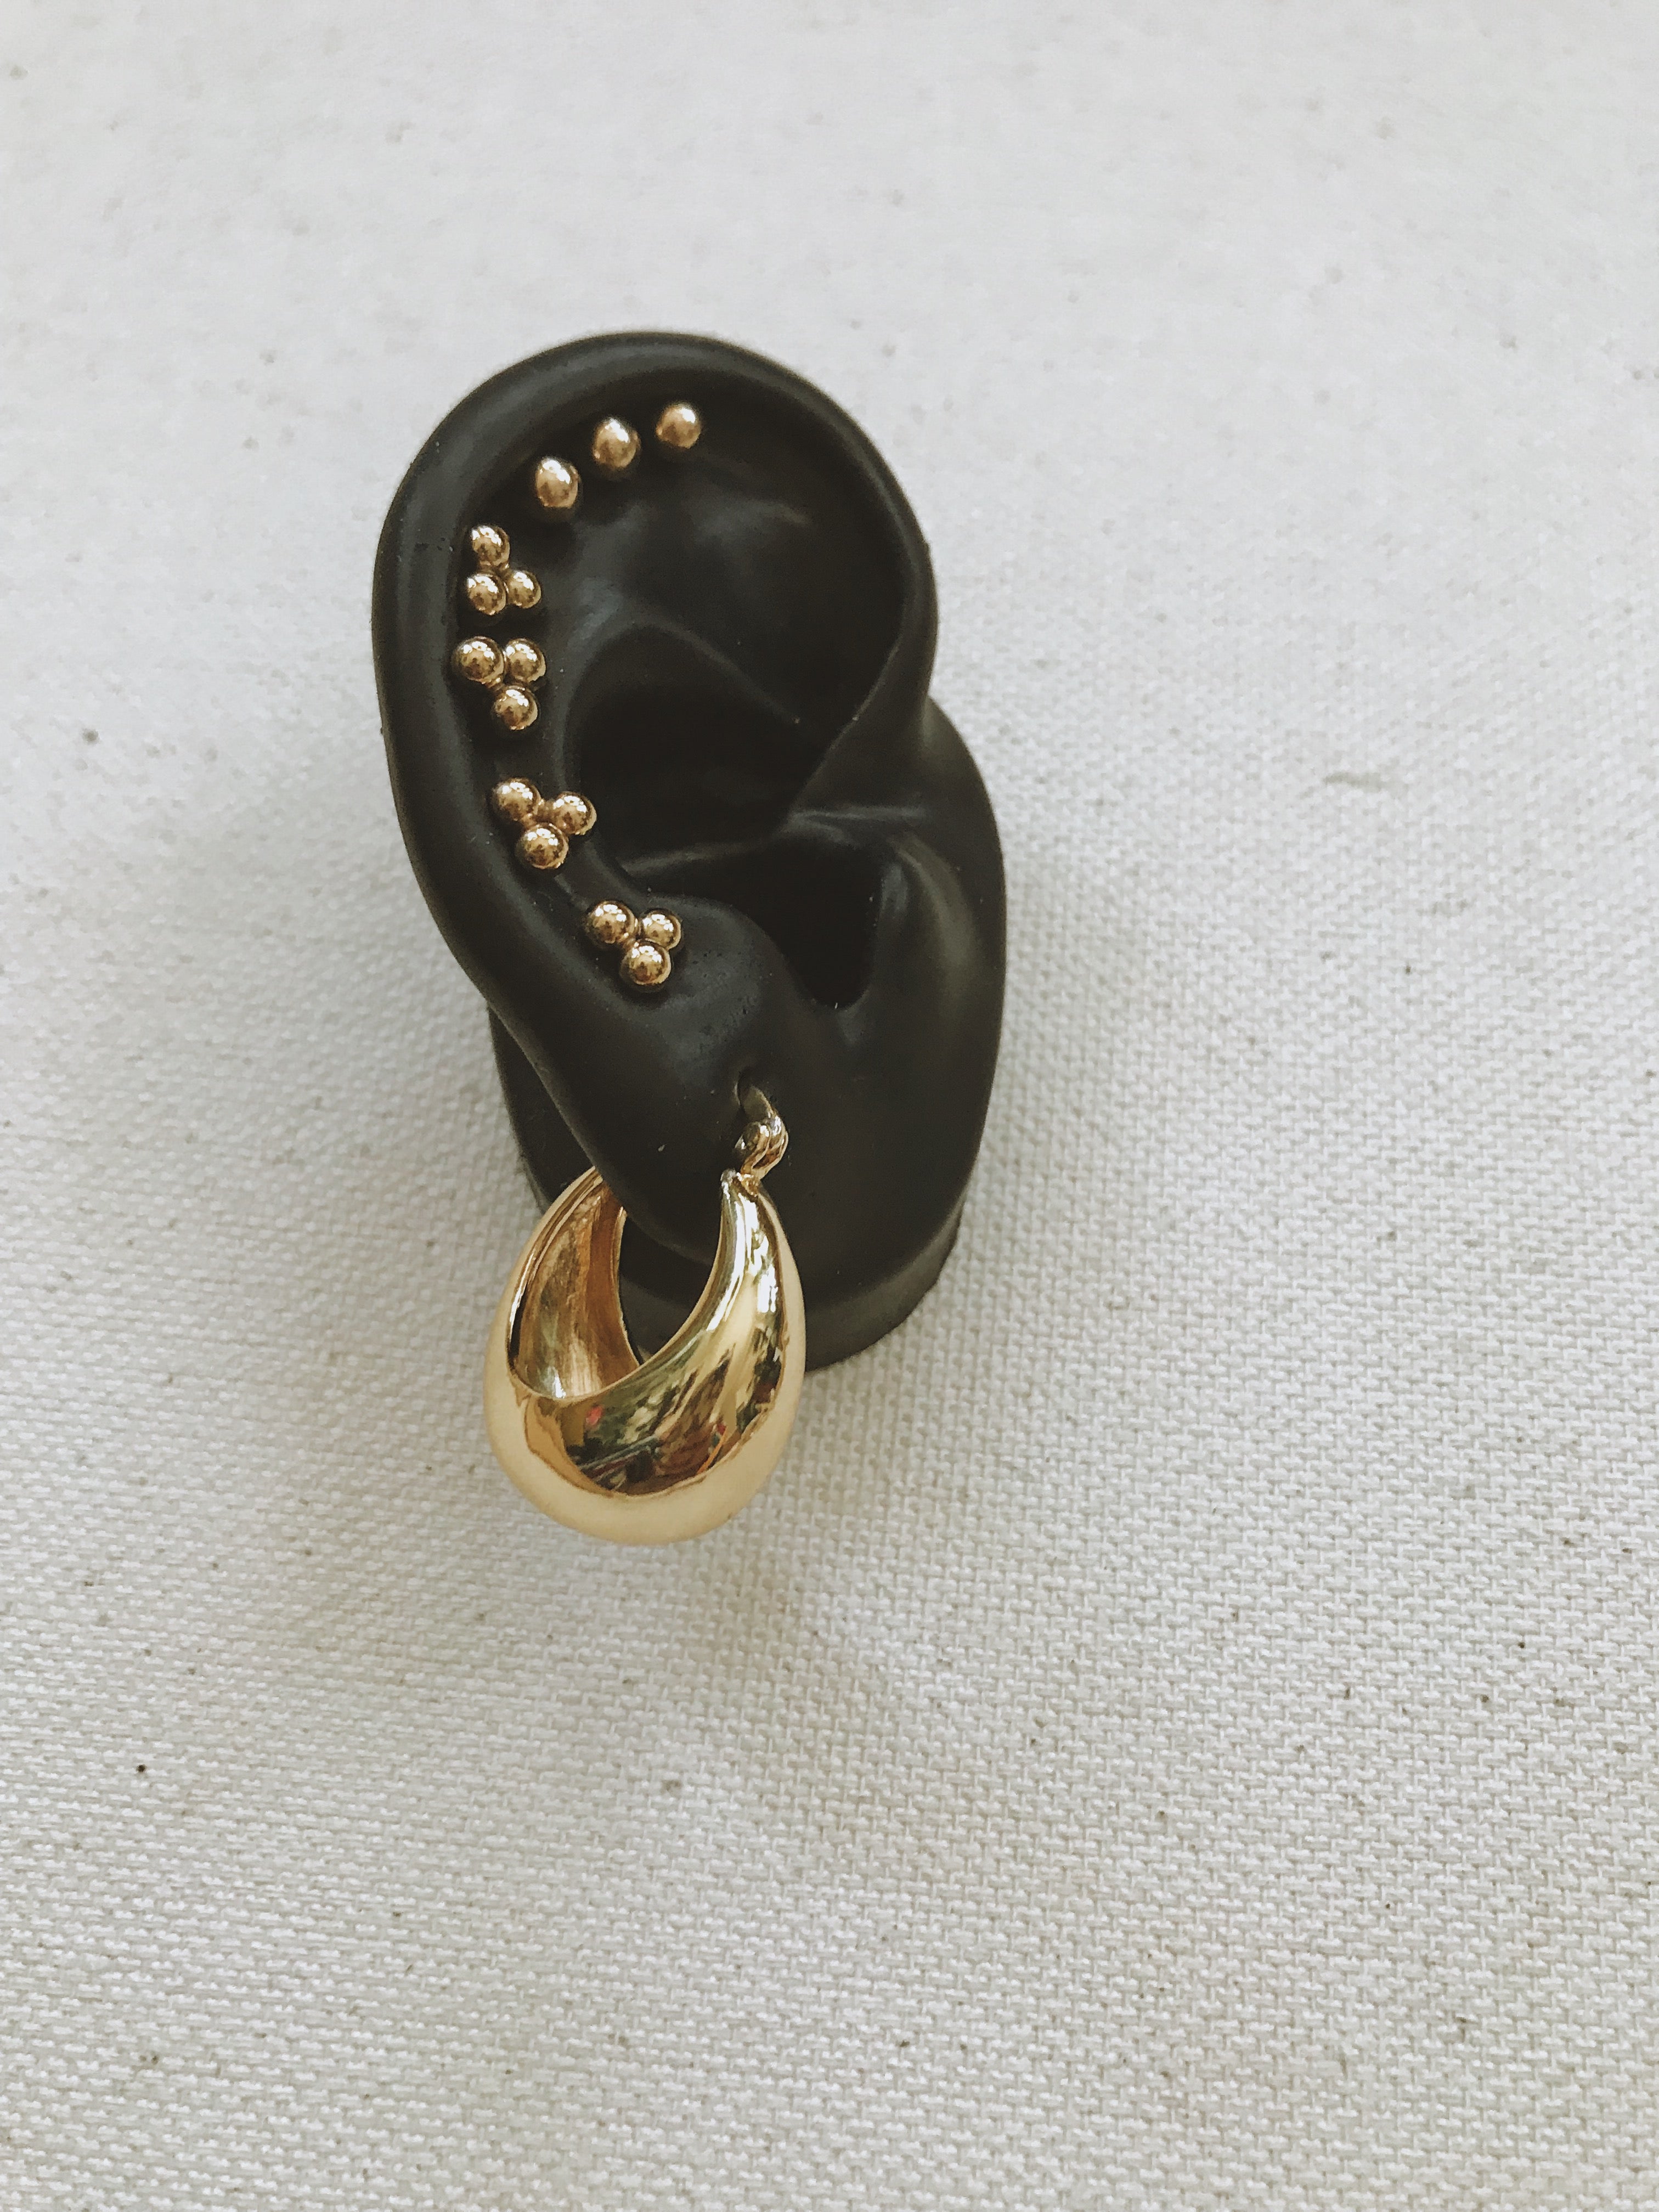 Earthseed Studs // Gold Filled or Sterling Silver